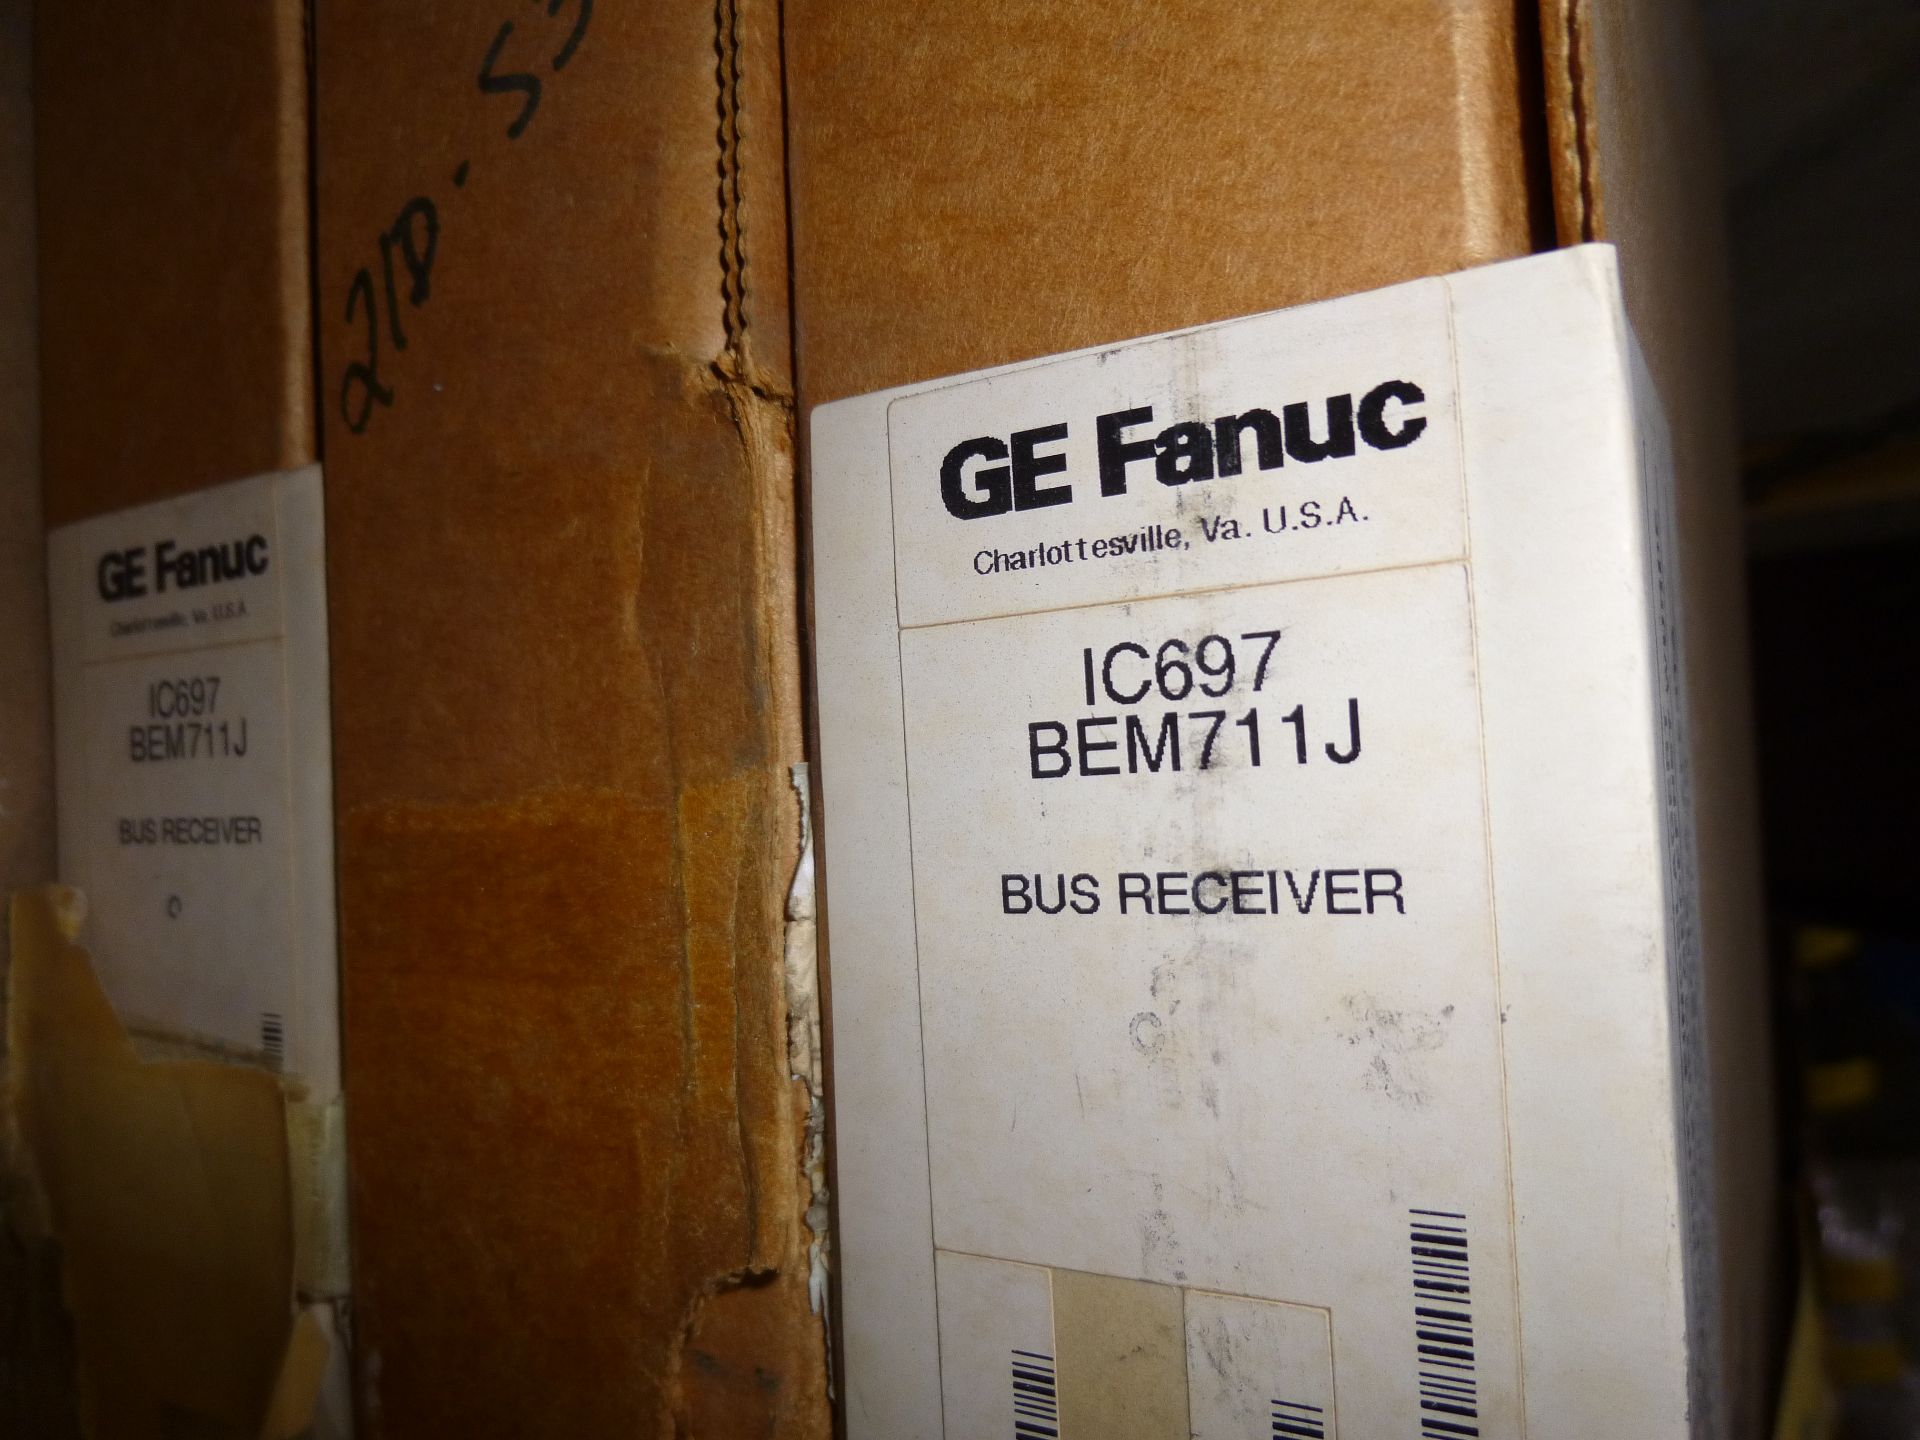 Qty 3 GE Fanuc Model IC697BEM711J, as always with Brolyn LLC auctions, all lots can be picked up - Image 2 of 2